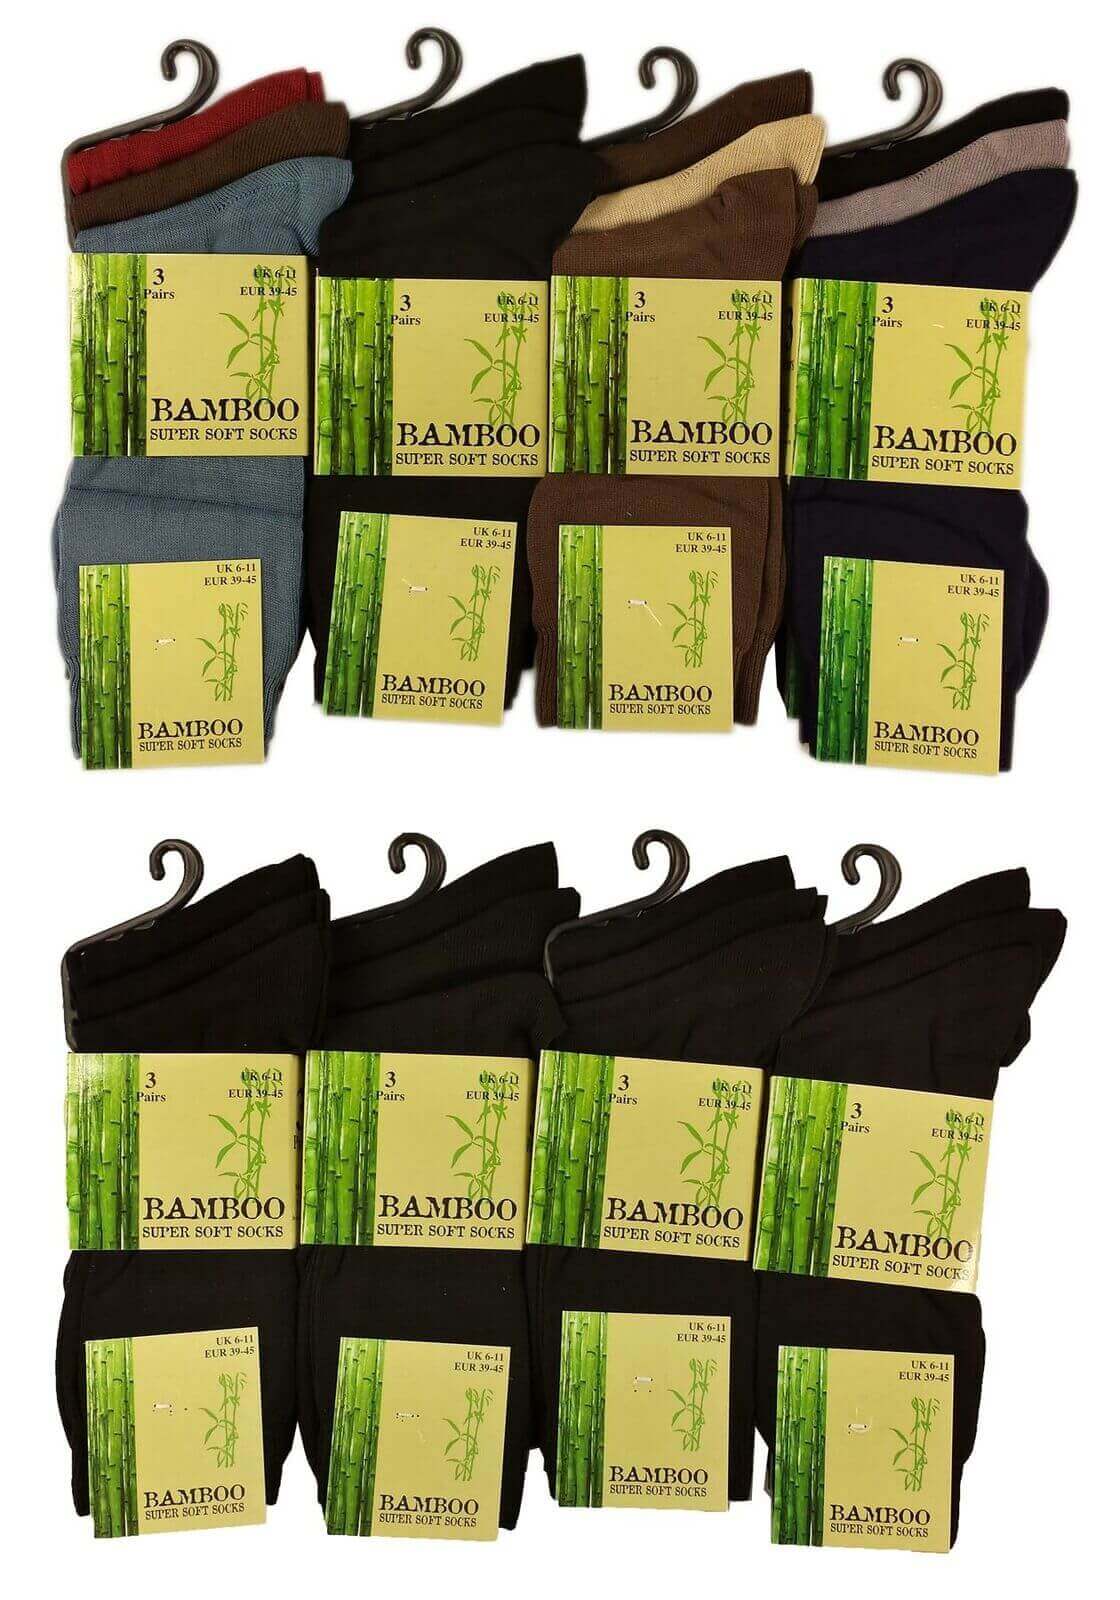 6 Pairs Of Men's Bamboo Socks Plain Super Soft Fine Anti Bacterial Socks. Buy now for £8.00. A Socks by Sock Stack. 6-11, anti bacterial, anti blister, assorted, bamboo, black, blue, boot, boys, brown, comfortable, cotton, dress socks, formal wear, mens,